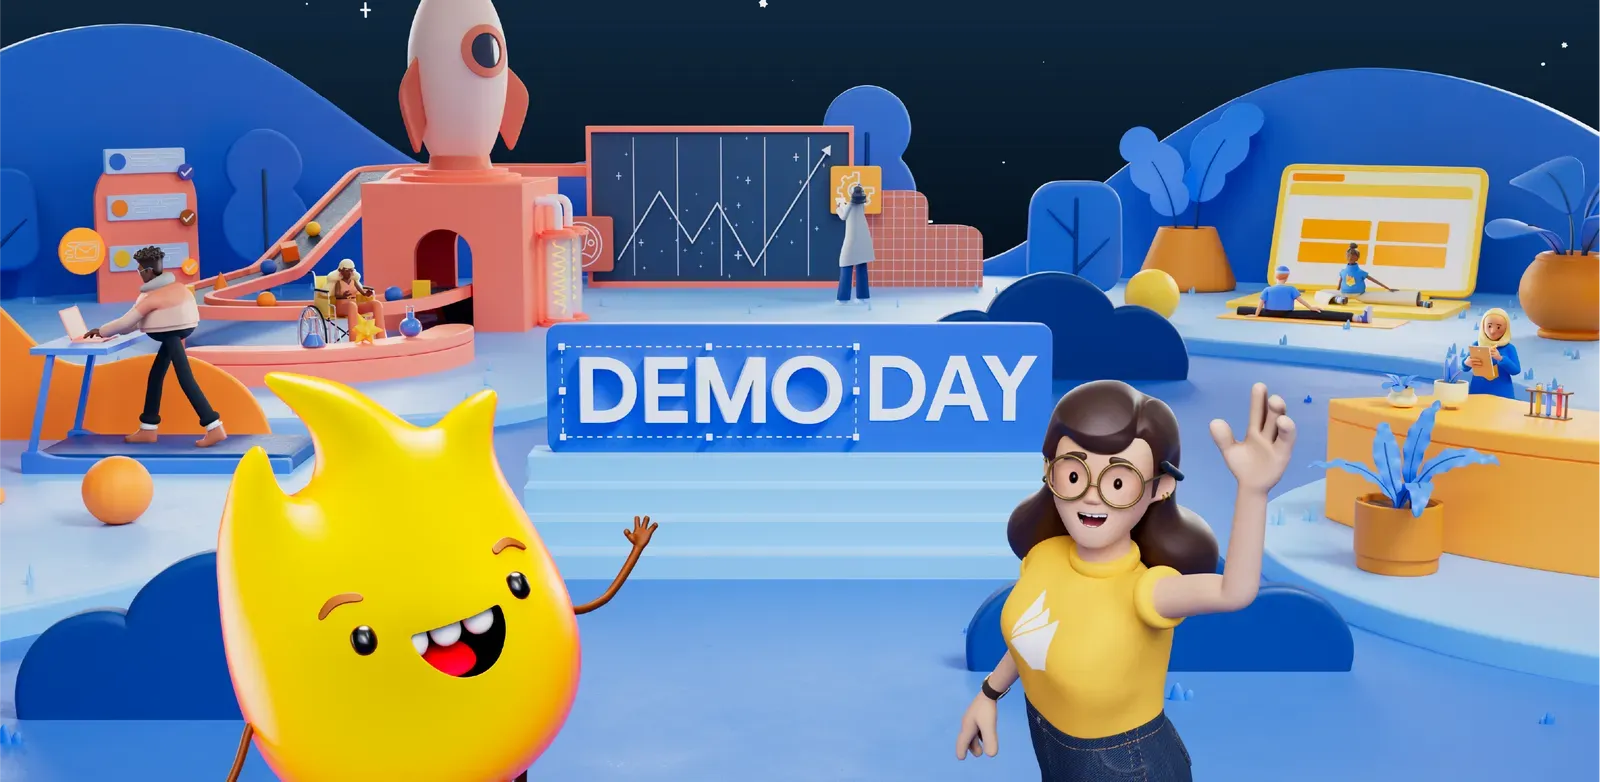 Sparky and a developer welcoming you to demo day